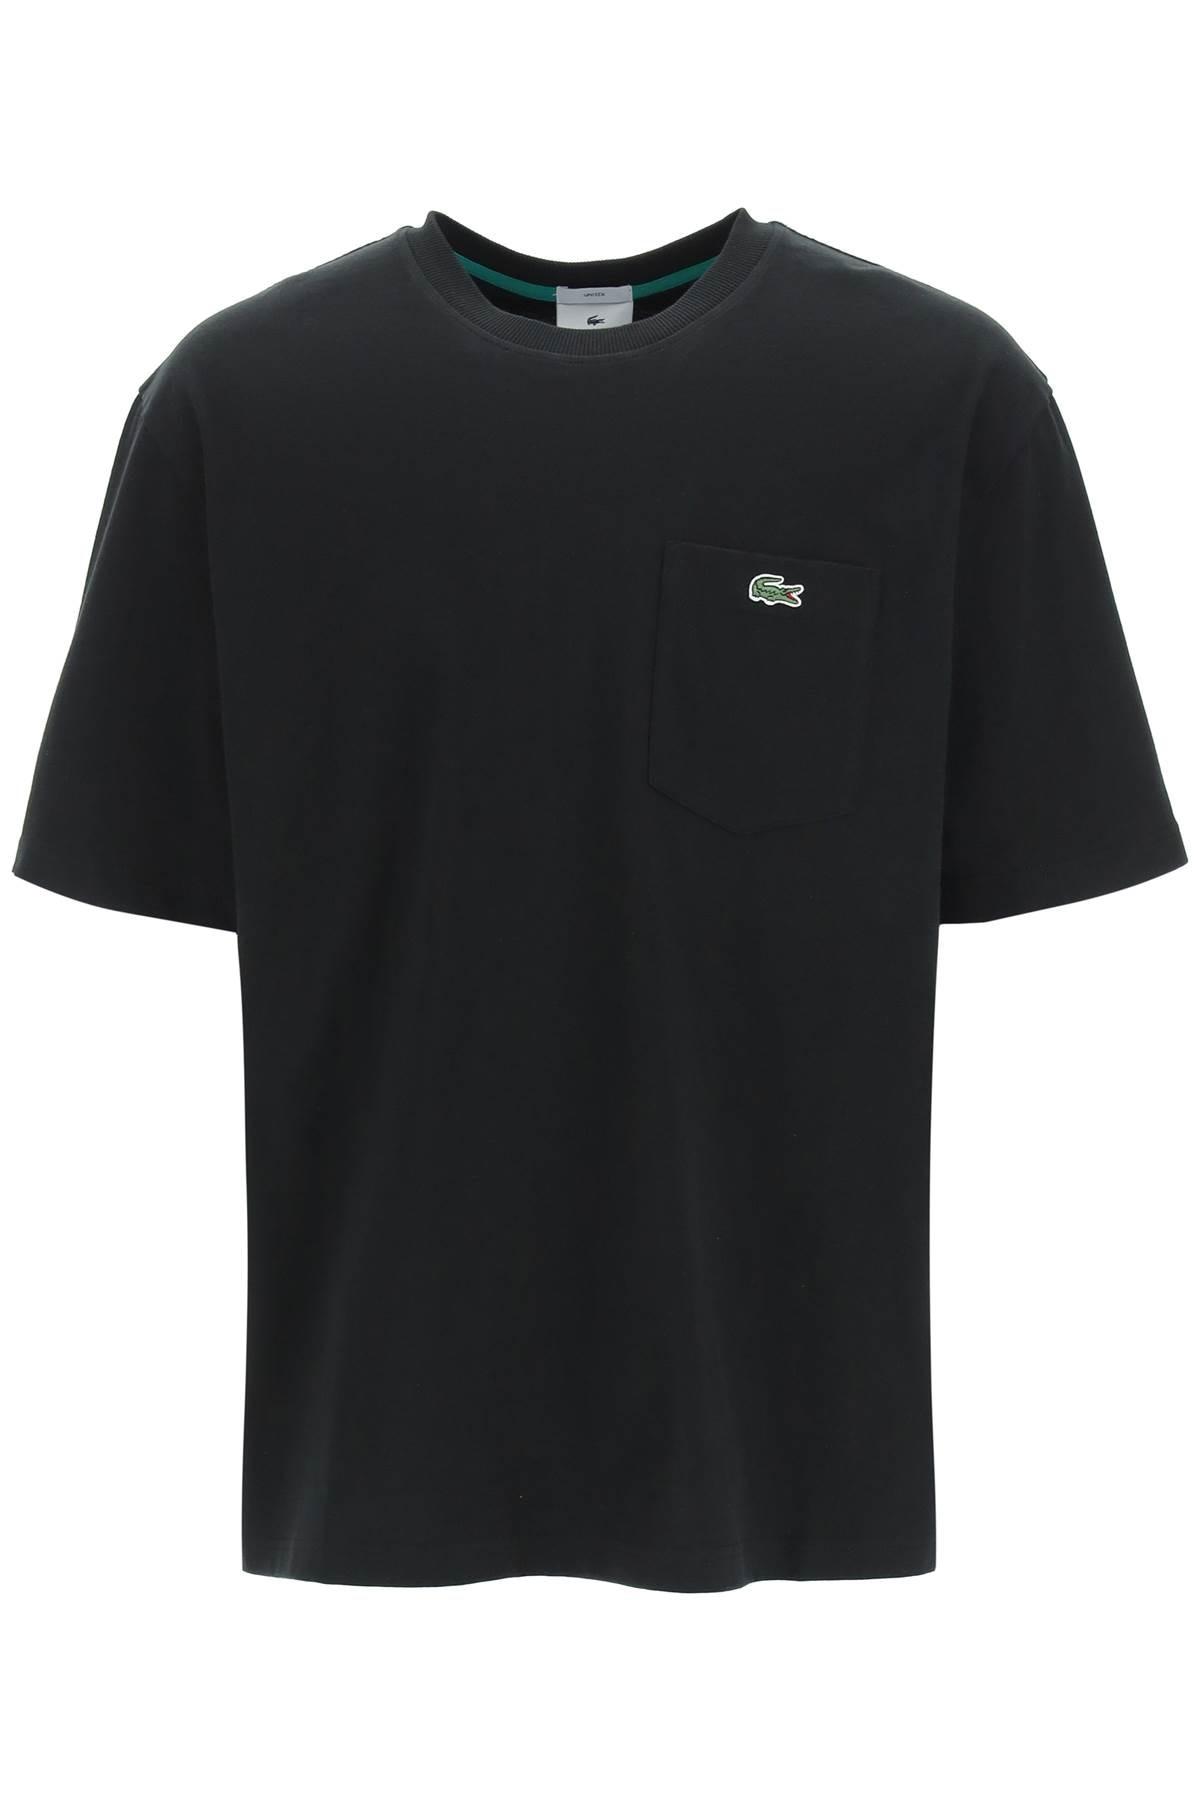 Lacoste L!ive Print T-shirt in Black for Men | Lyst